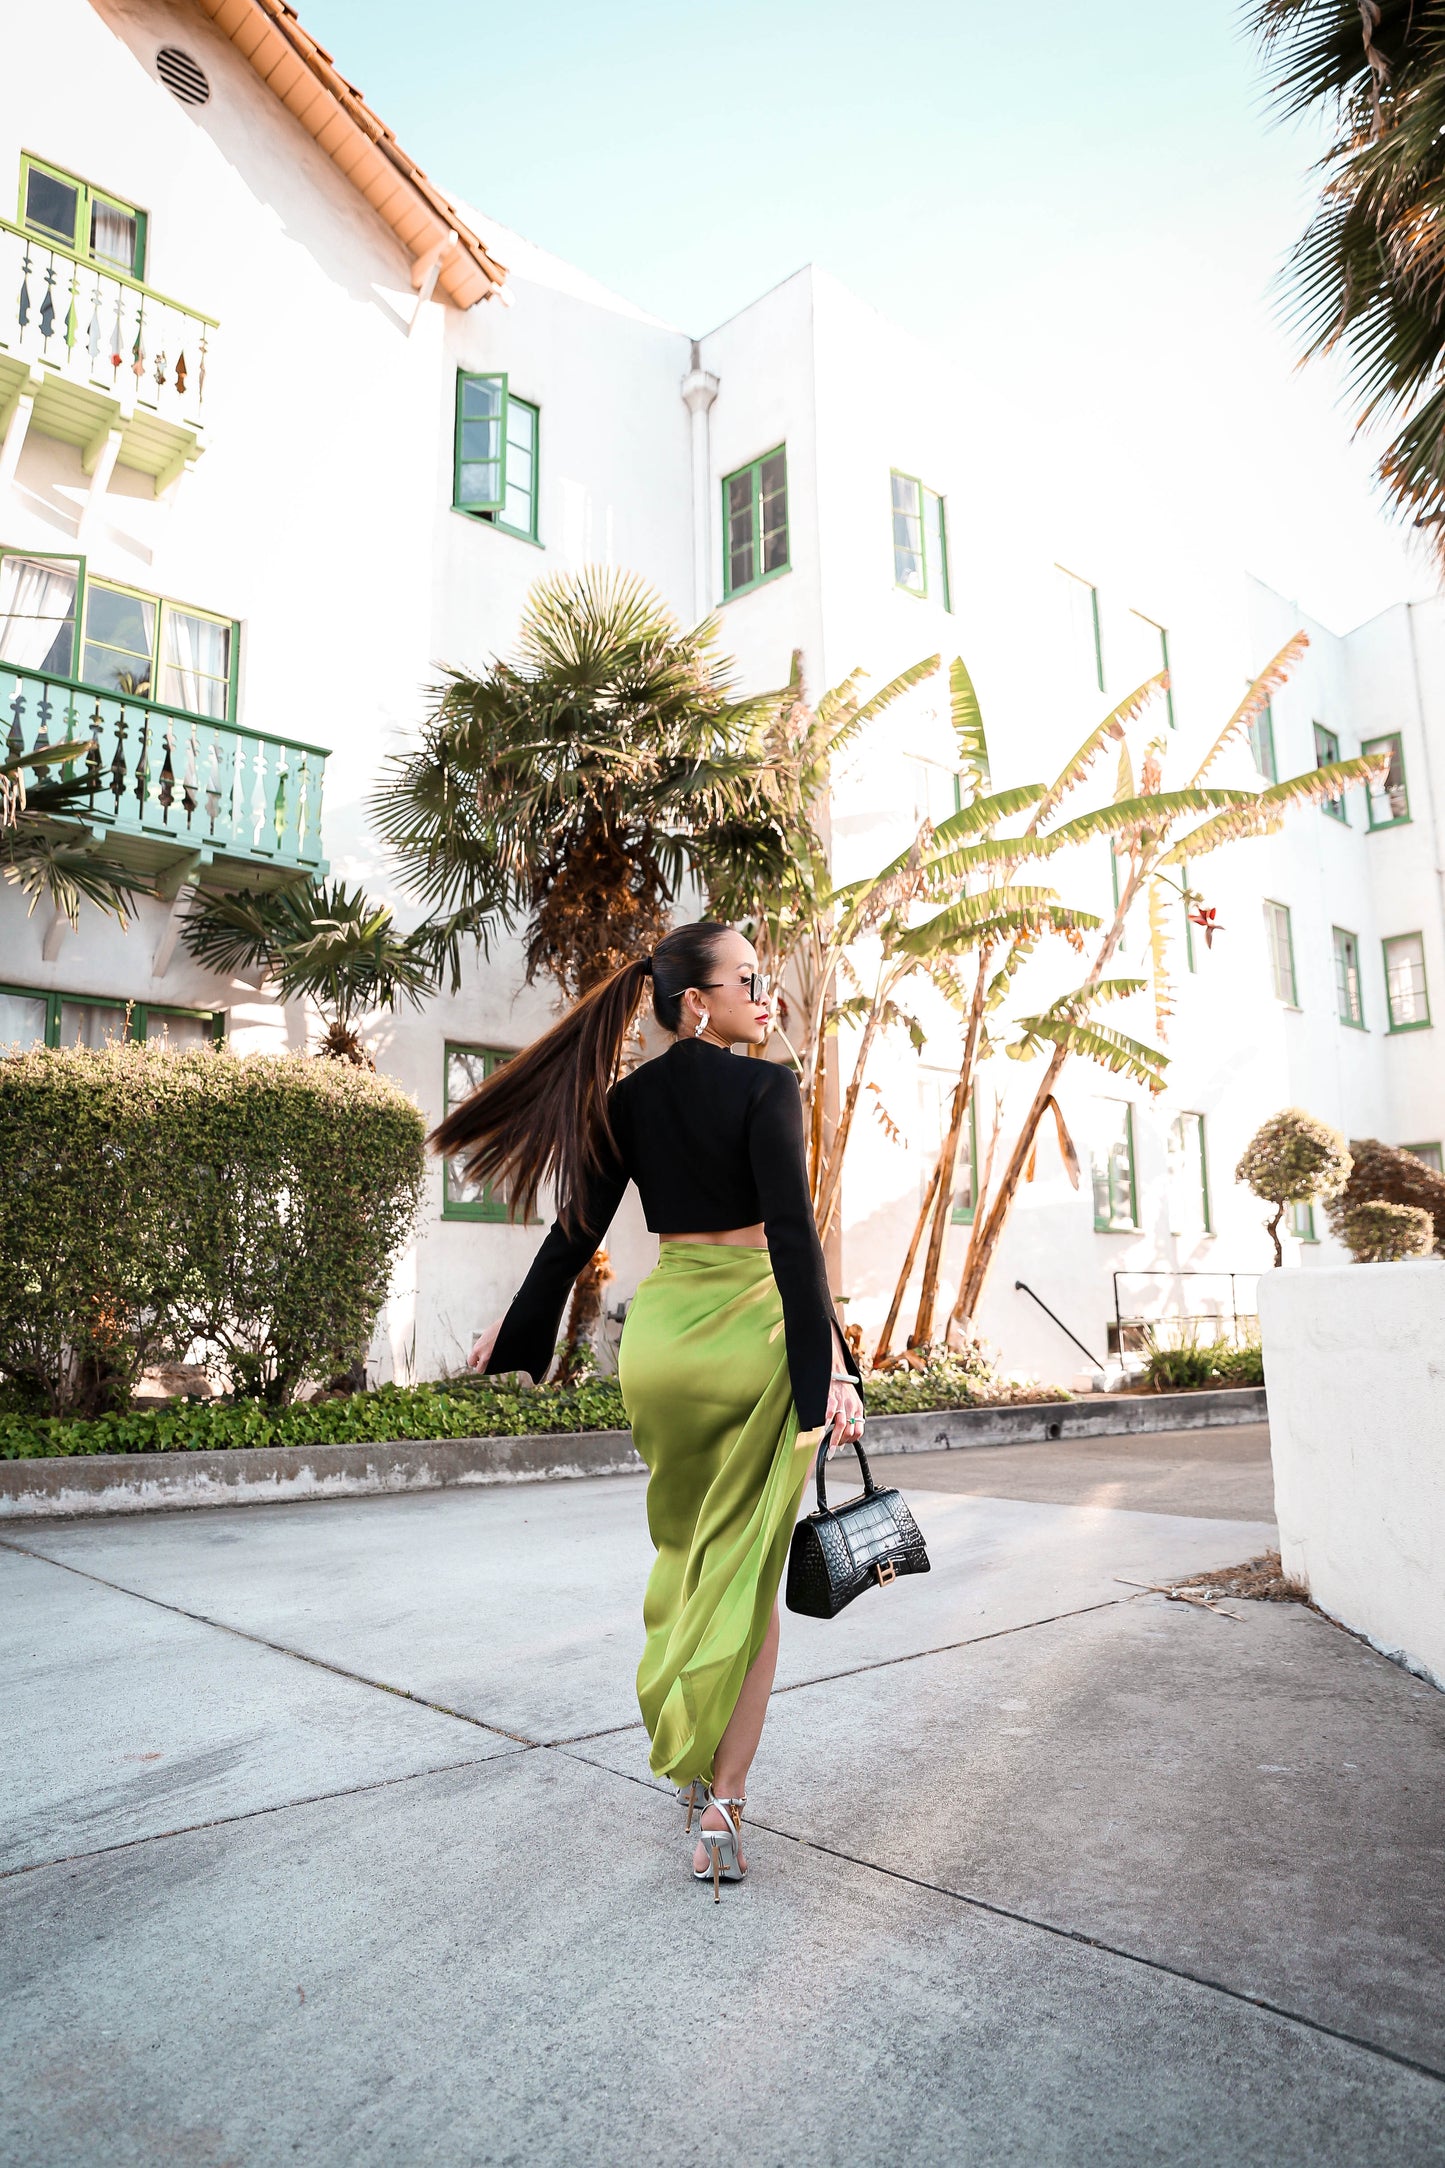 MADE TO ORDER: The Miami Skirt